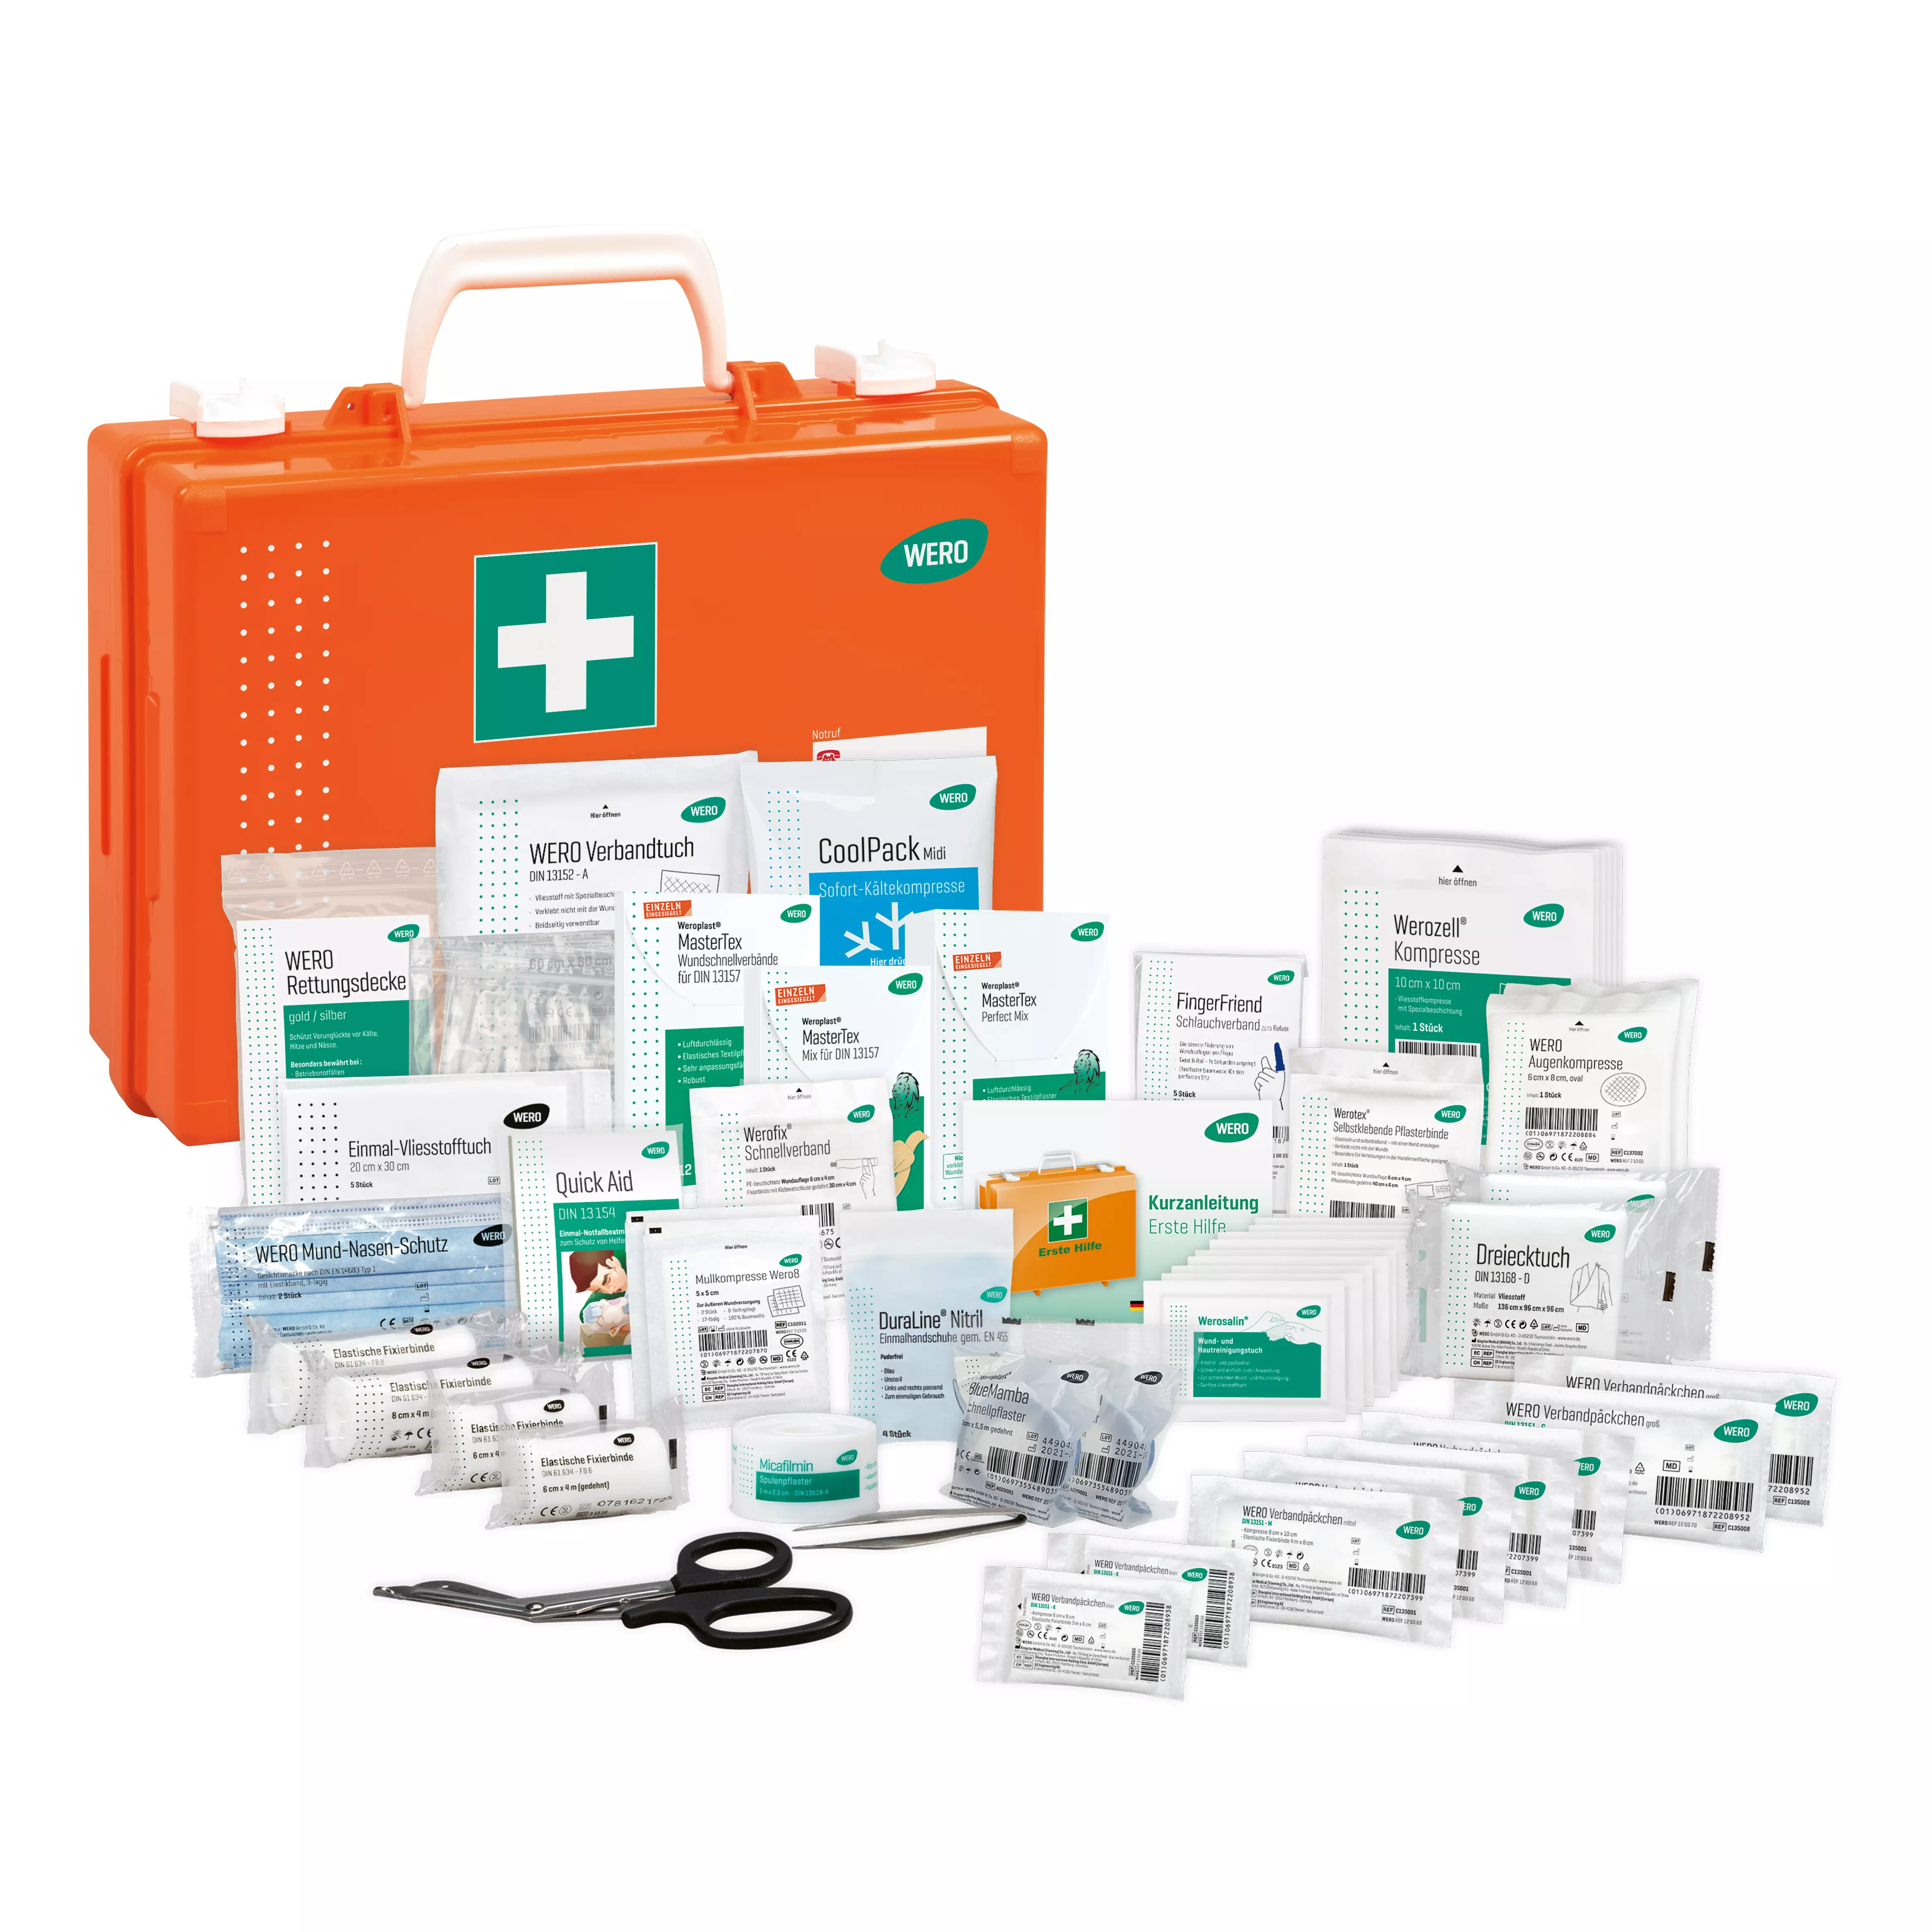 Werotop® 350 First aid kit with extended DIN filling DIN 13157 Allround